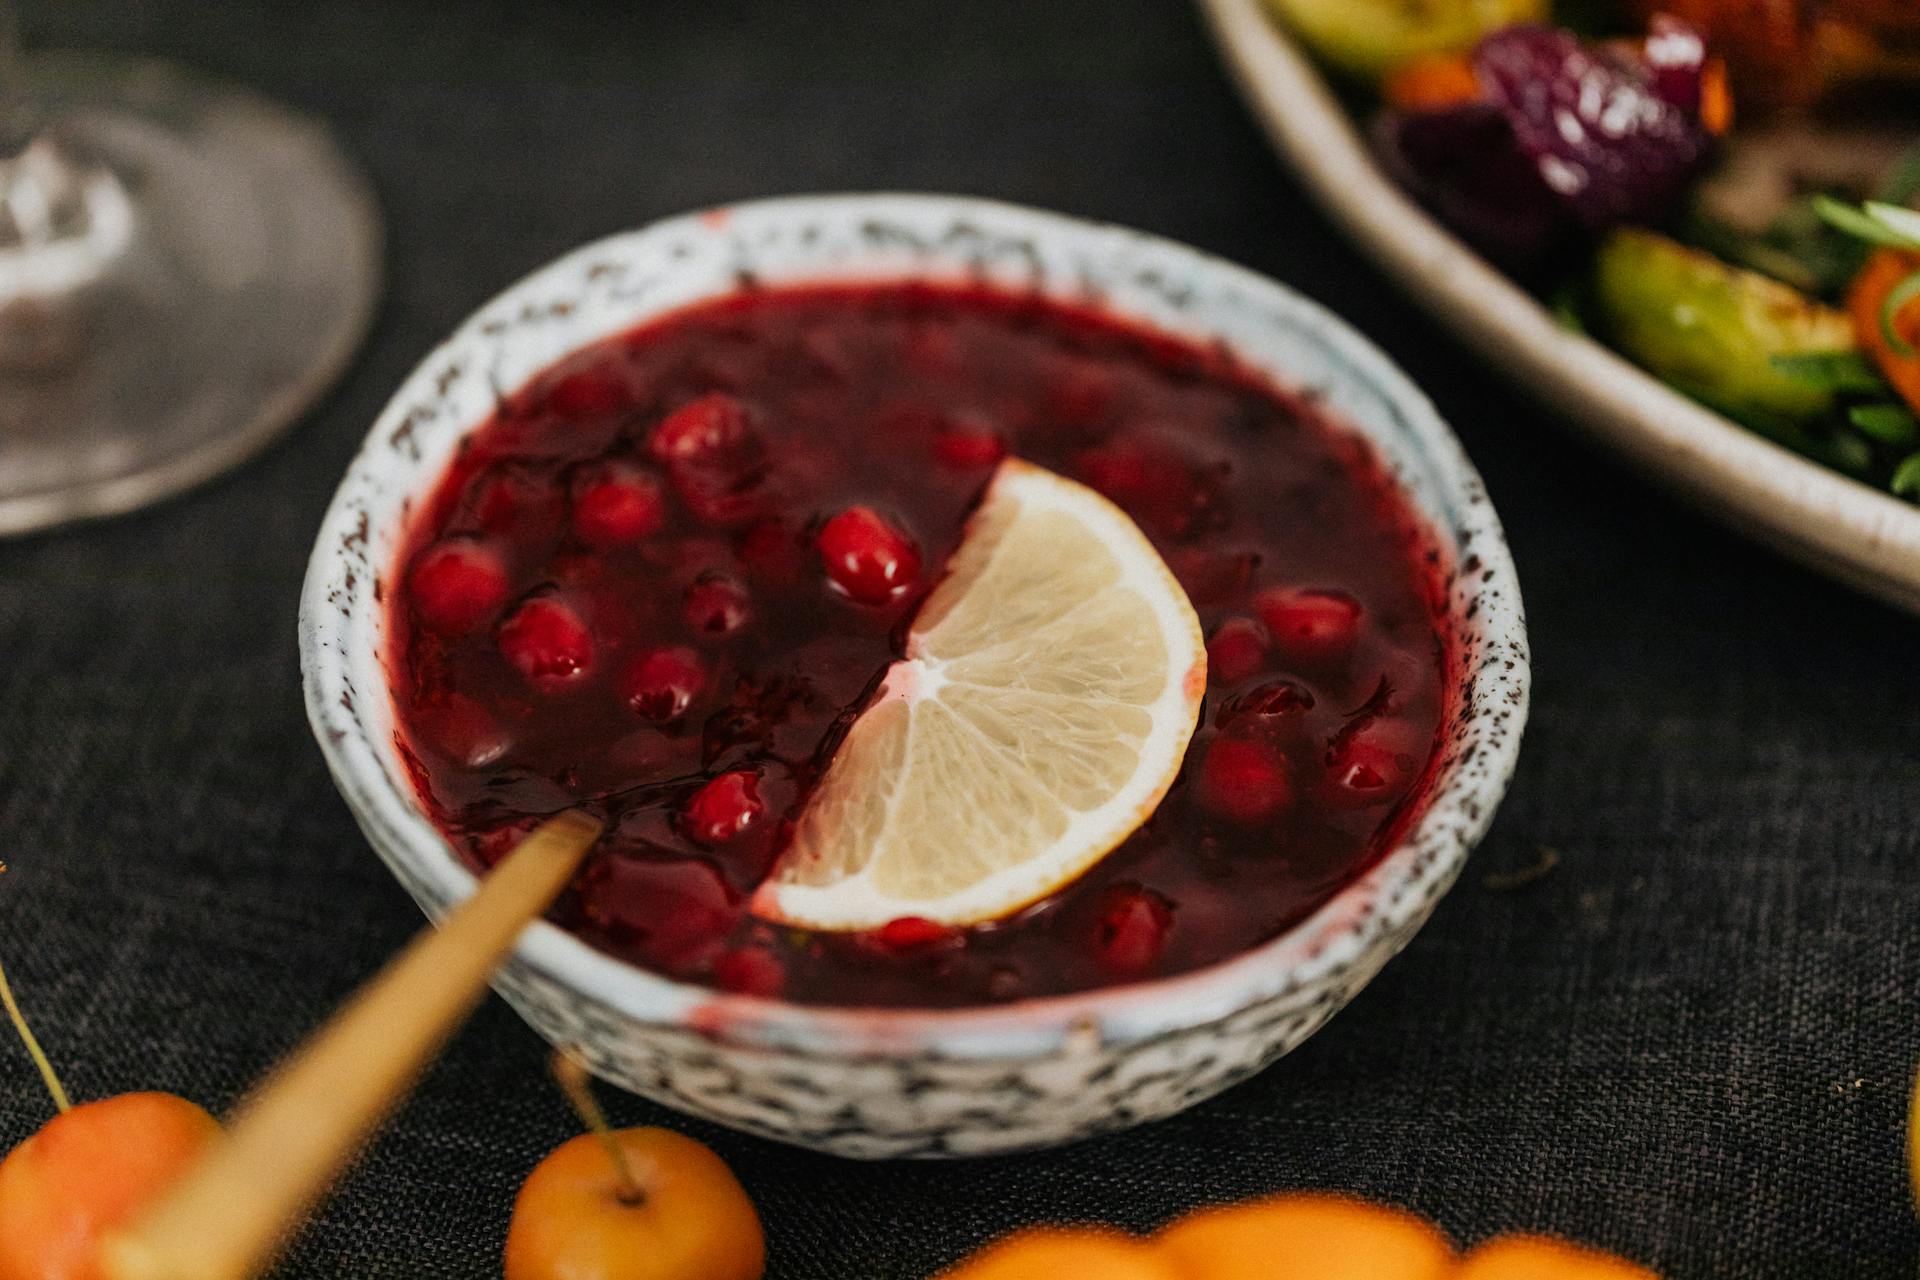 How Long Does Canned Cranberry Sauce Last In The Fridge? | Fridge.com